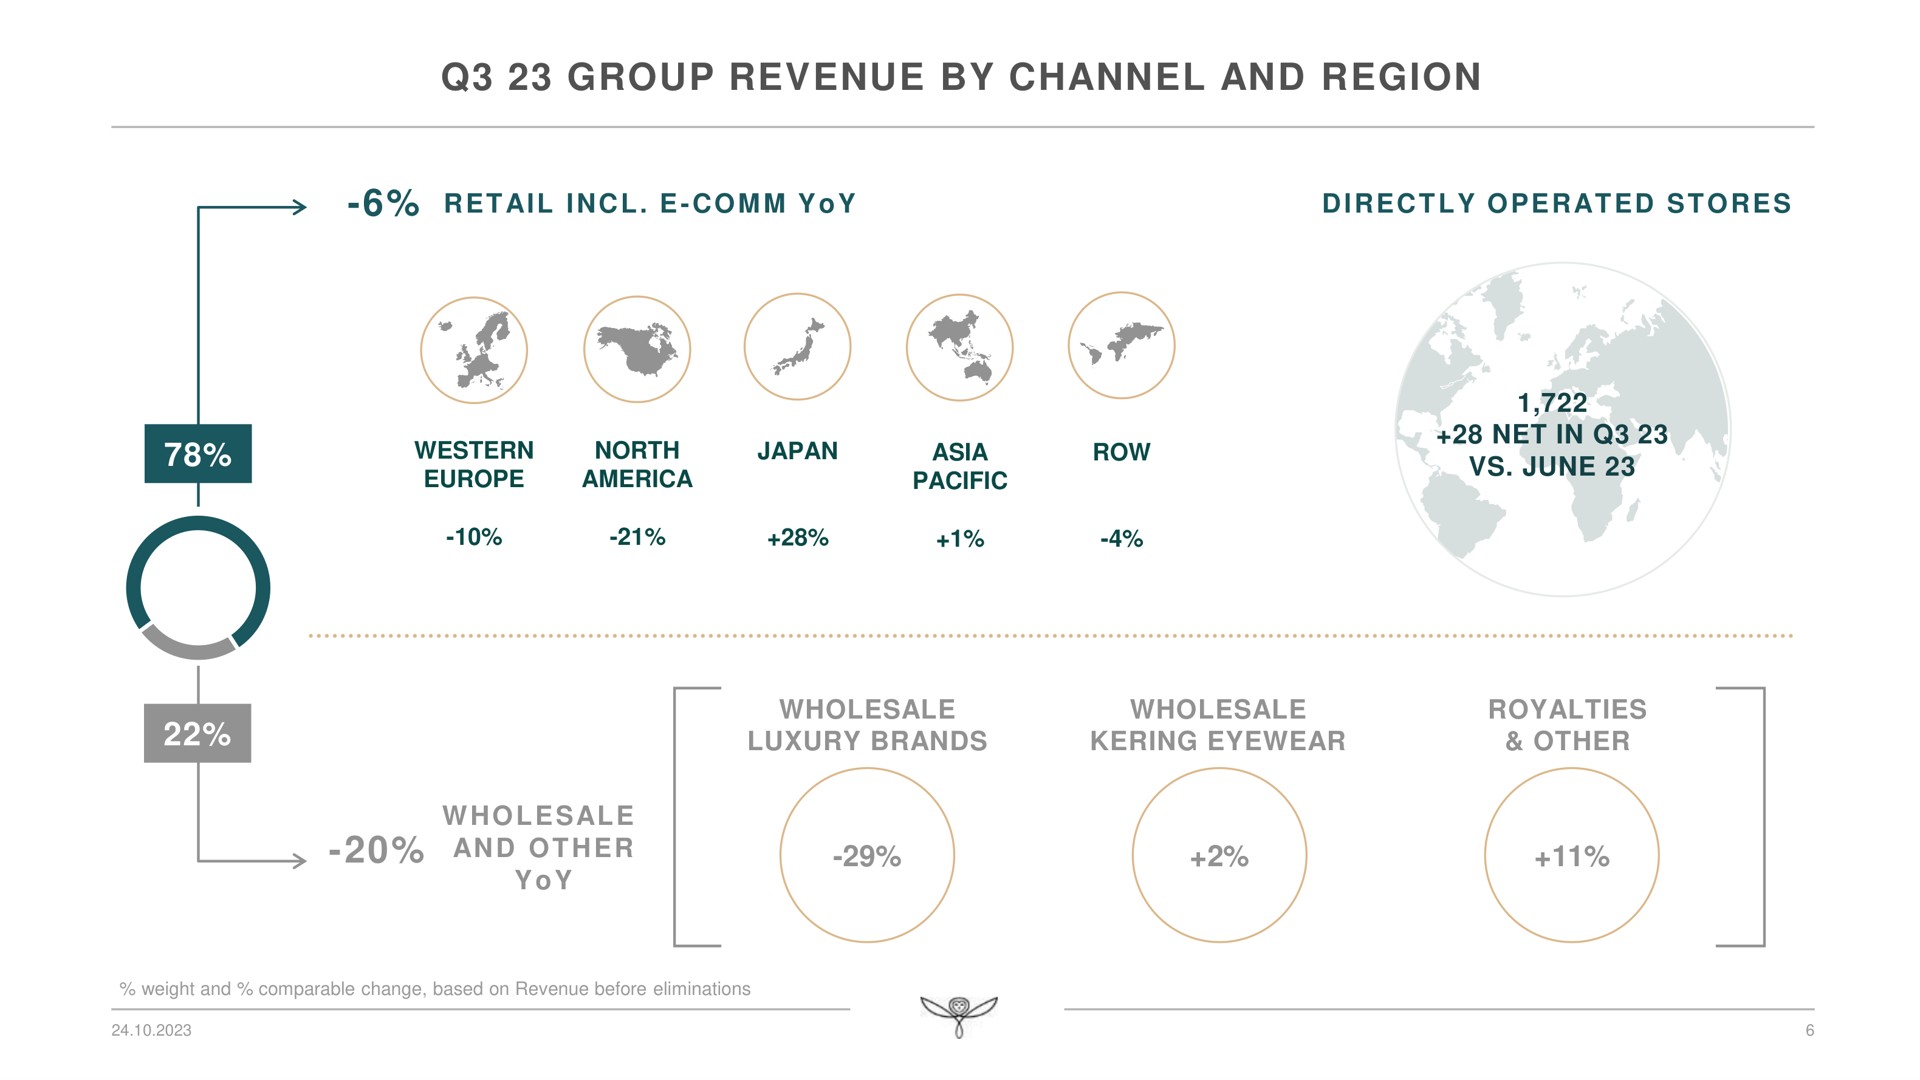 group revenue by channel and region i i at net in june wholesale luxury brands wholesale eyewear royalties other an tea western north japan | Kering